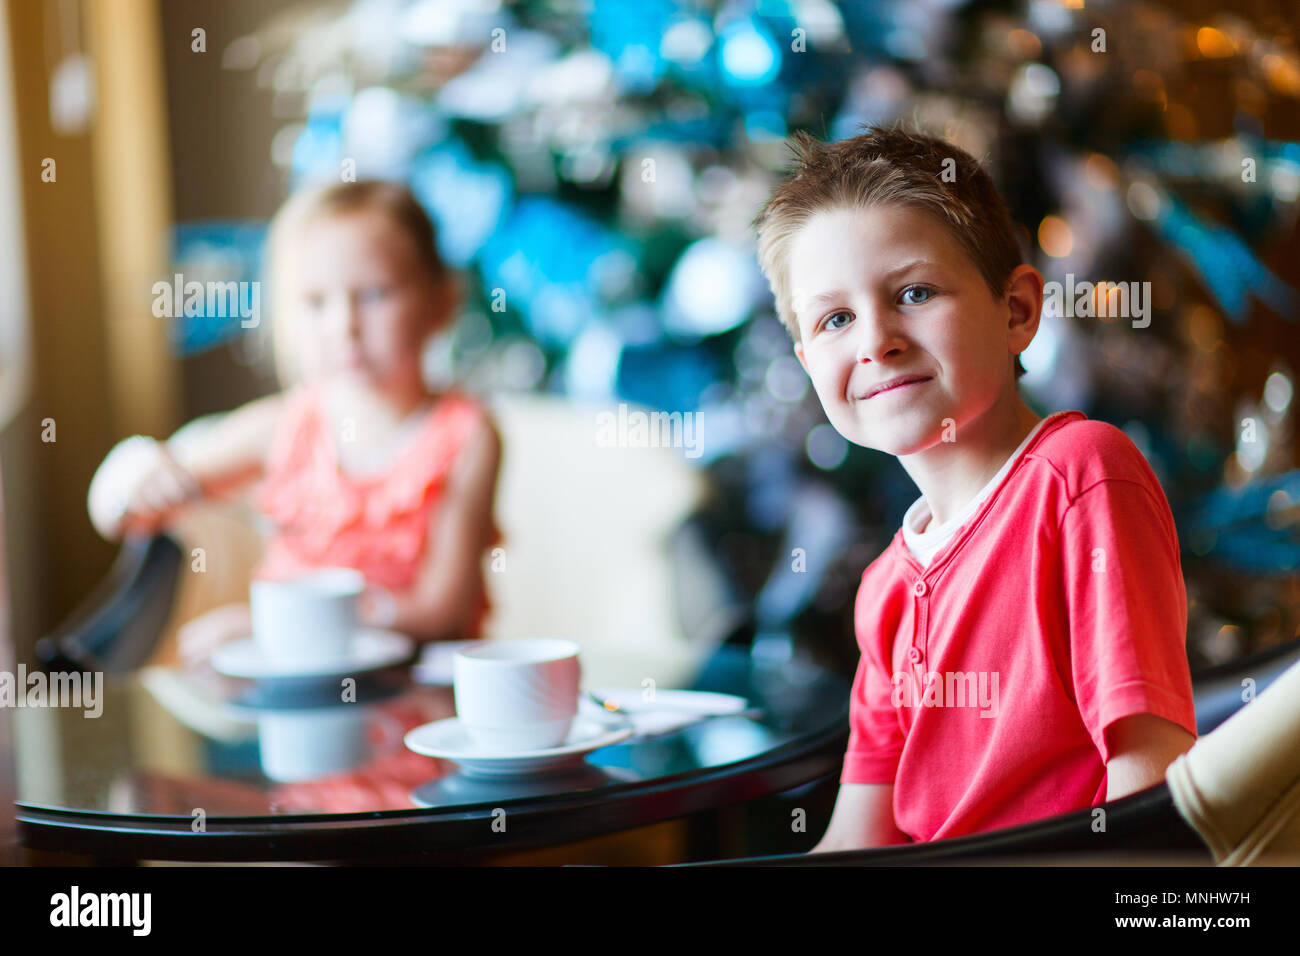 Two children drink tea from white cups in a room decorated for Christmas Stock Photo